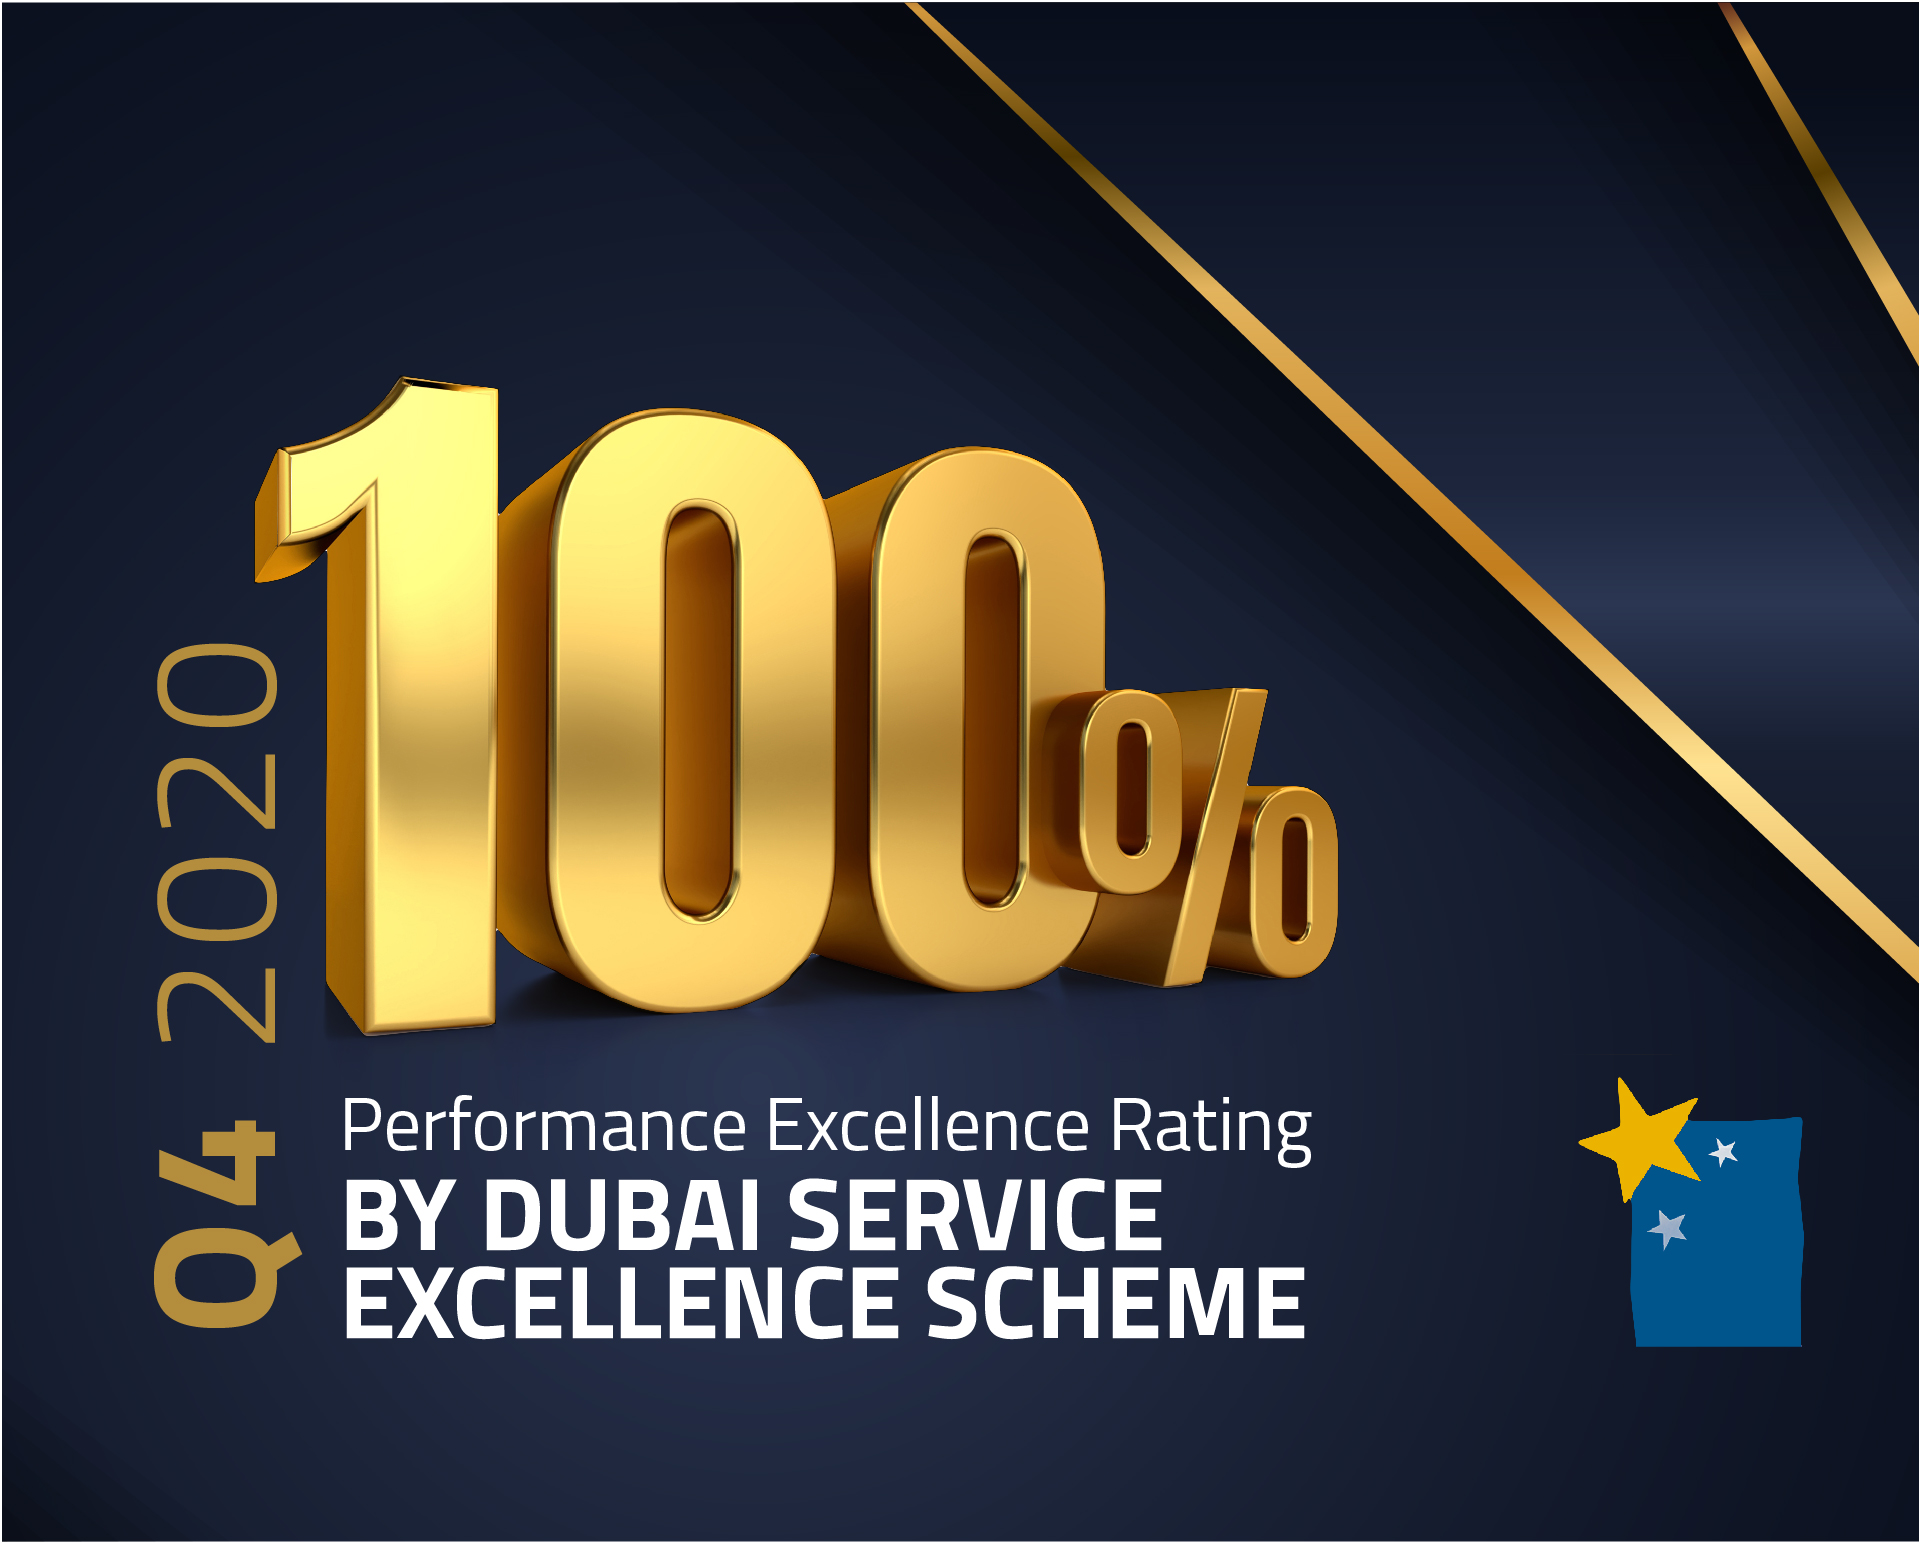 Finance House Securities Receives a Performance Excellence Rating of 100% for Q4 2020